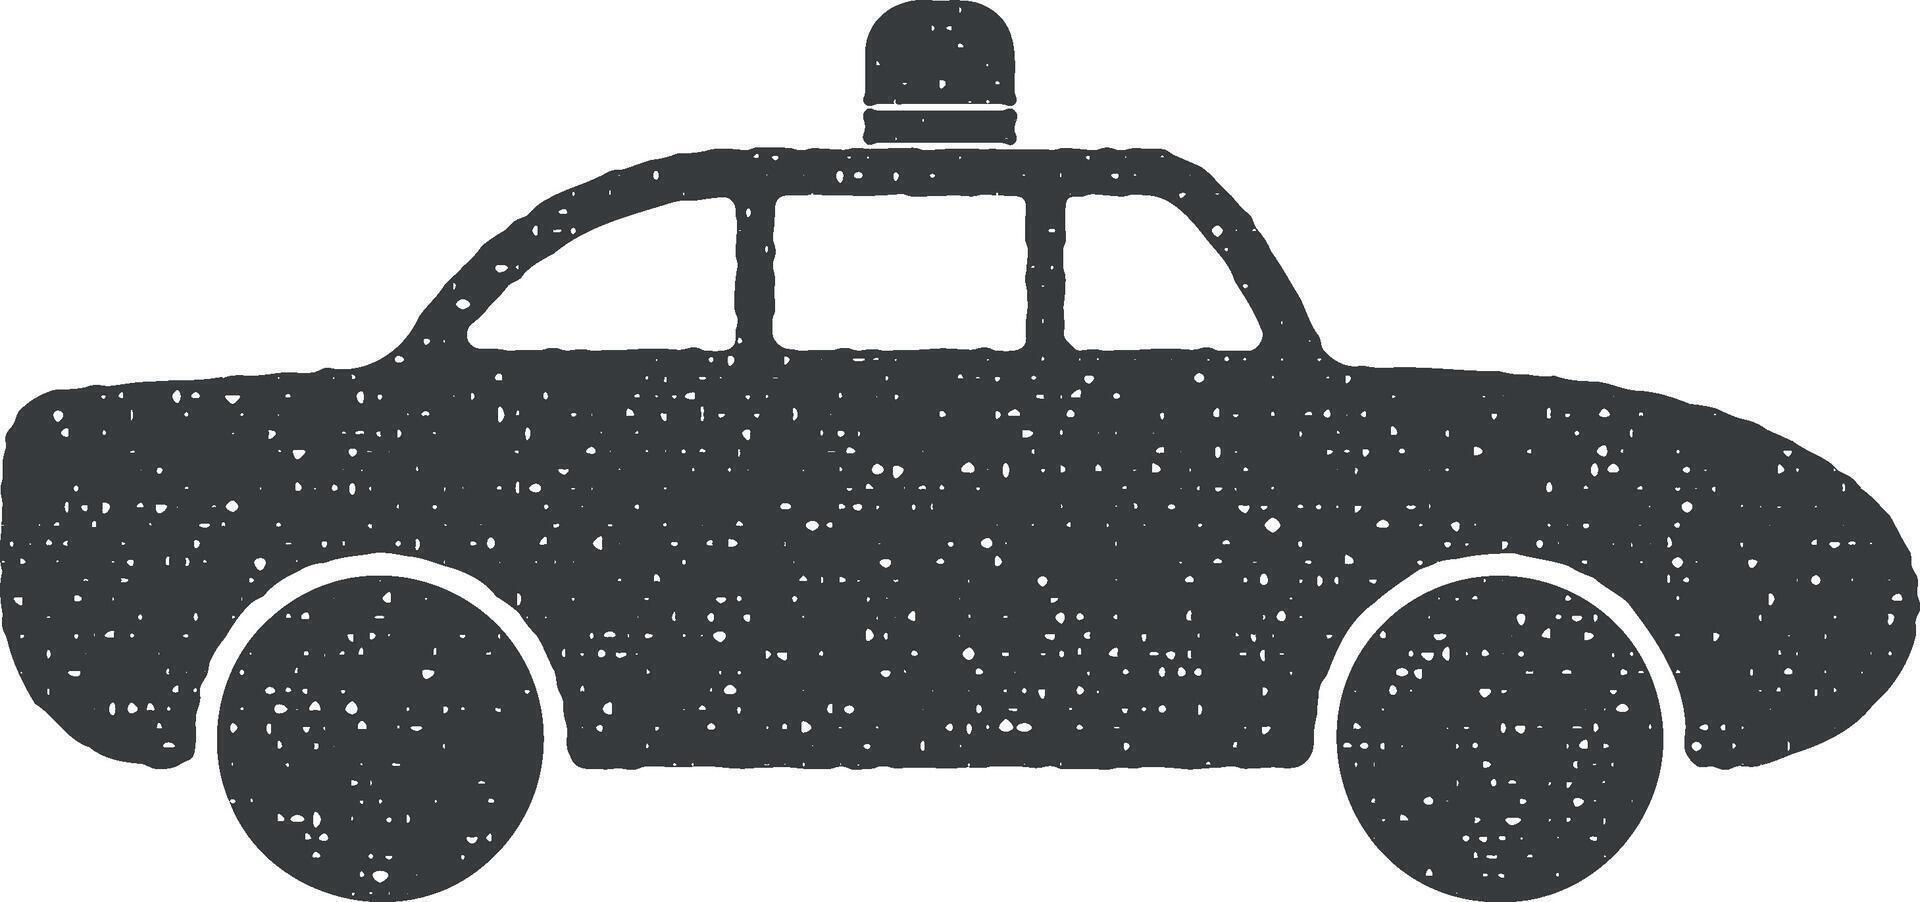 police car vector icon illustration with stamp effect